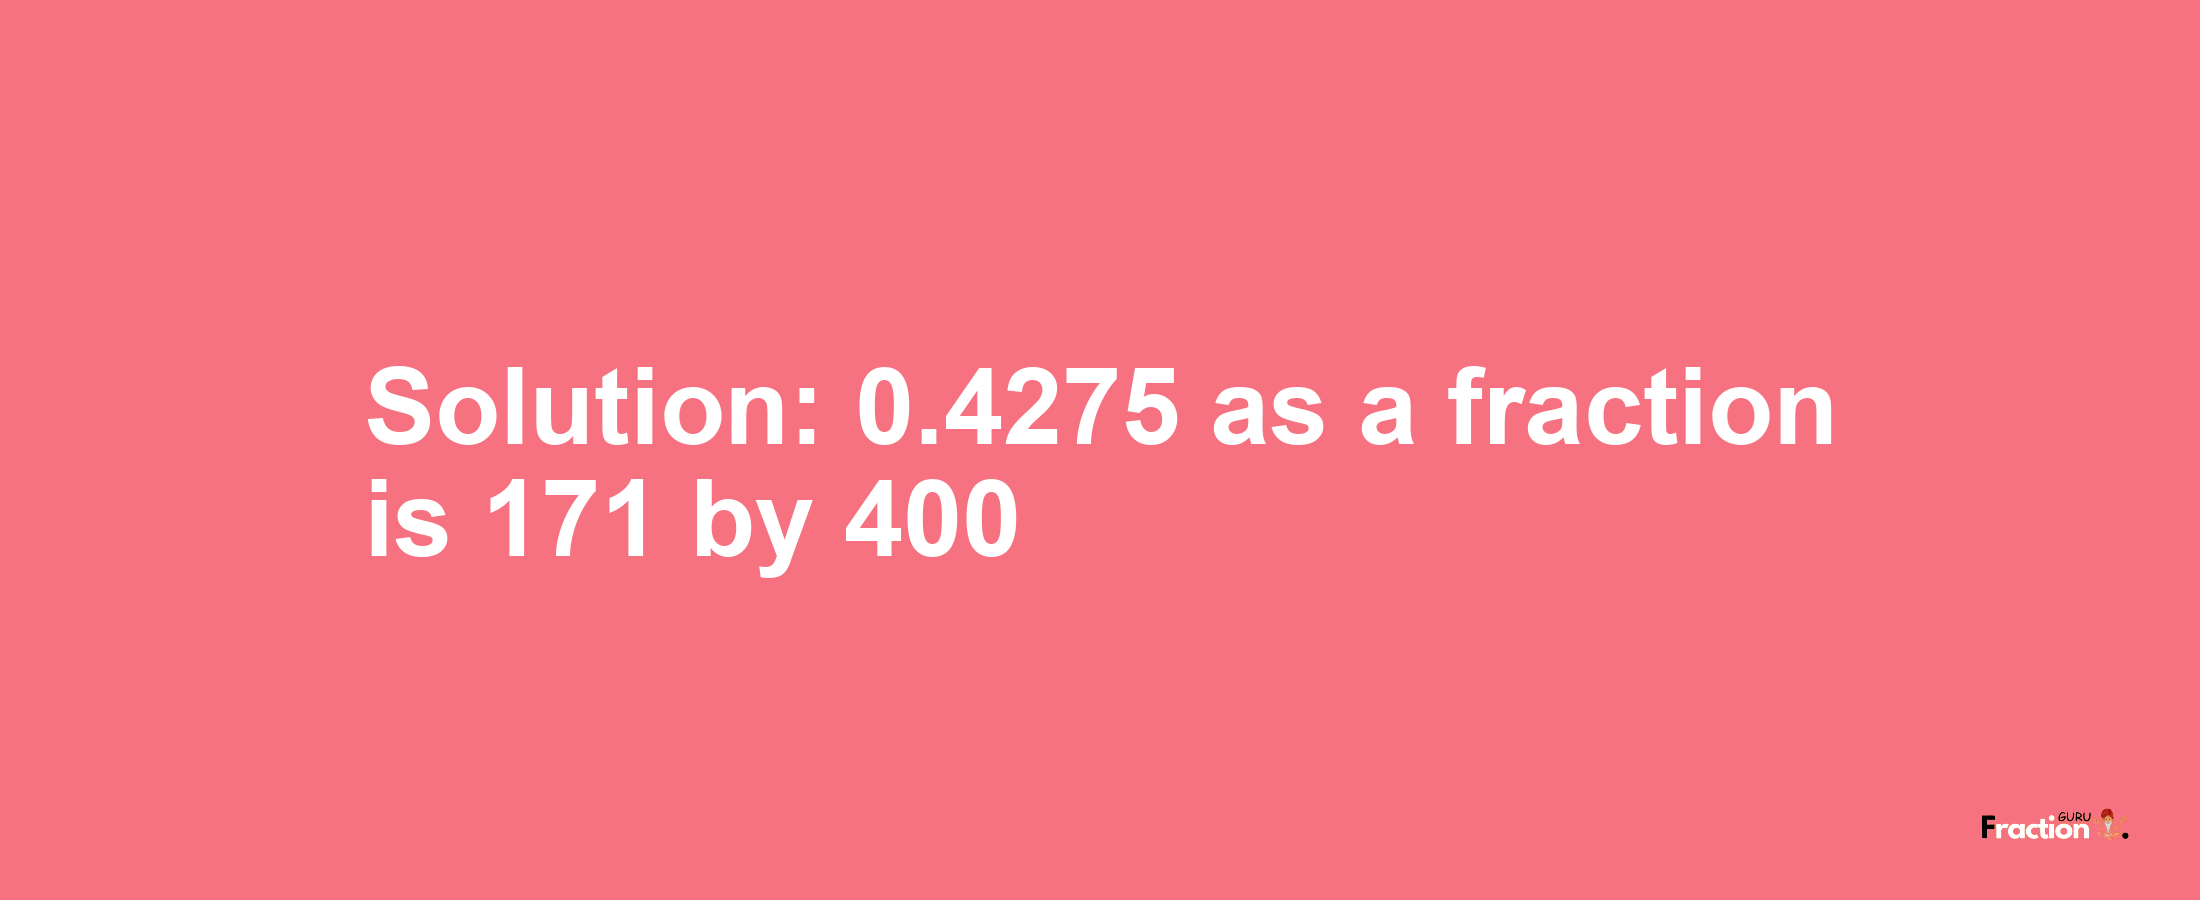 Solution:0.4275 as a fraction is 171/400